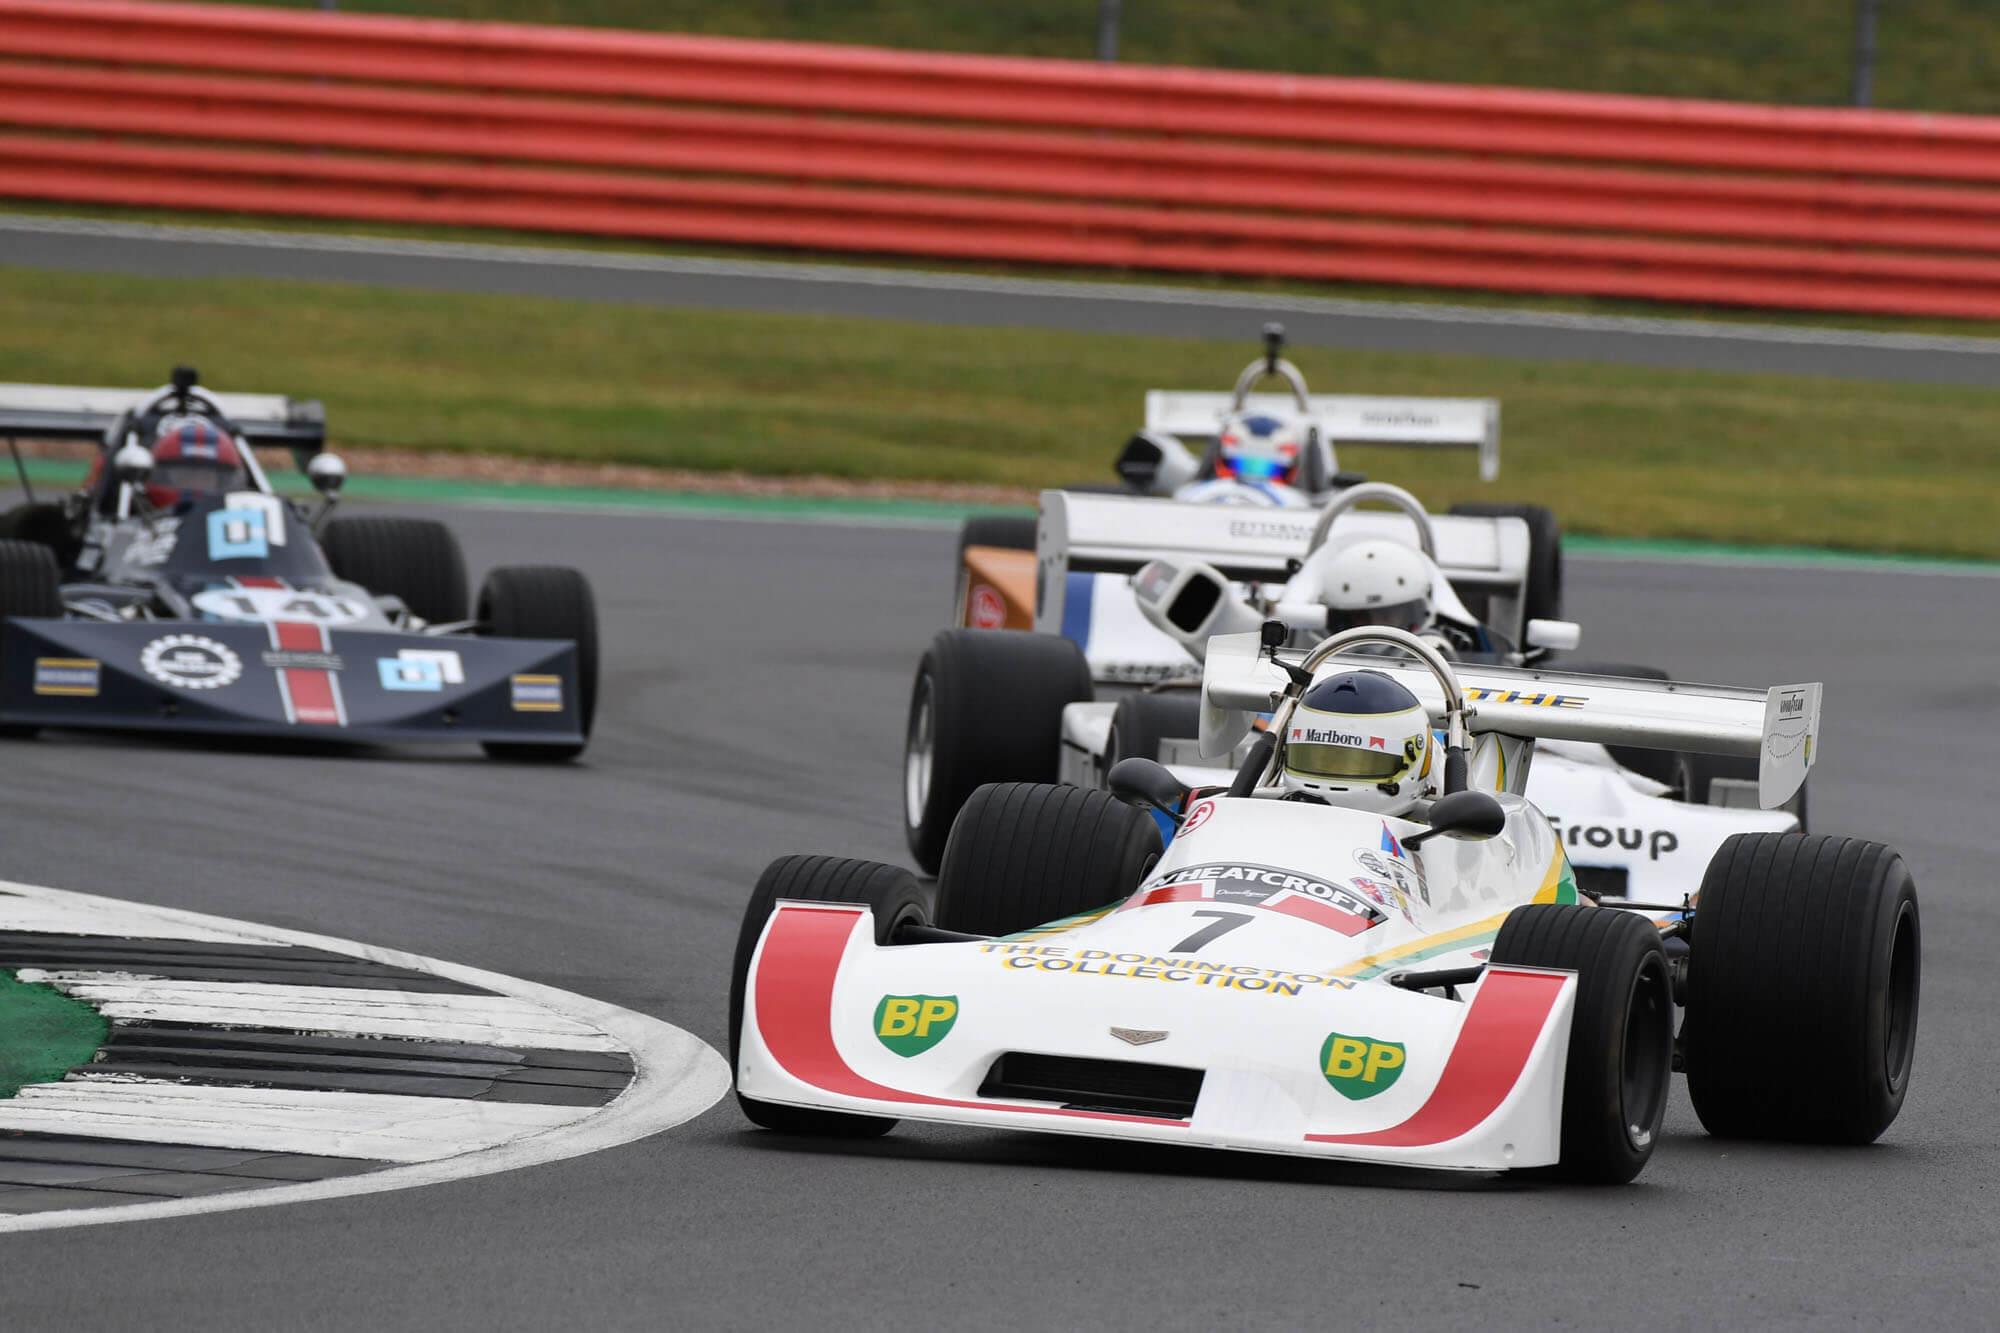 Three classic F2 cars competing the the F2 race at The Classic at Silverstone